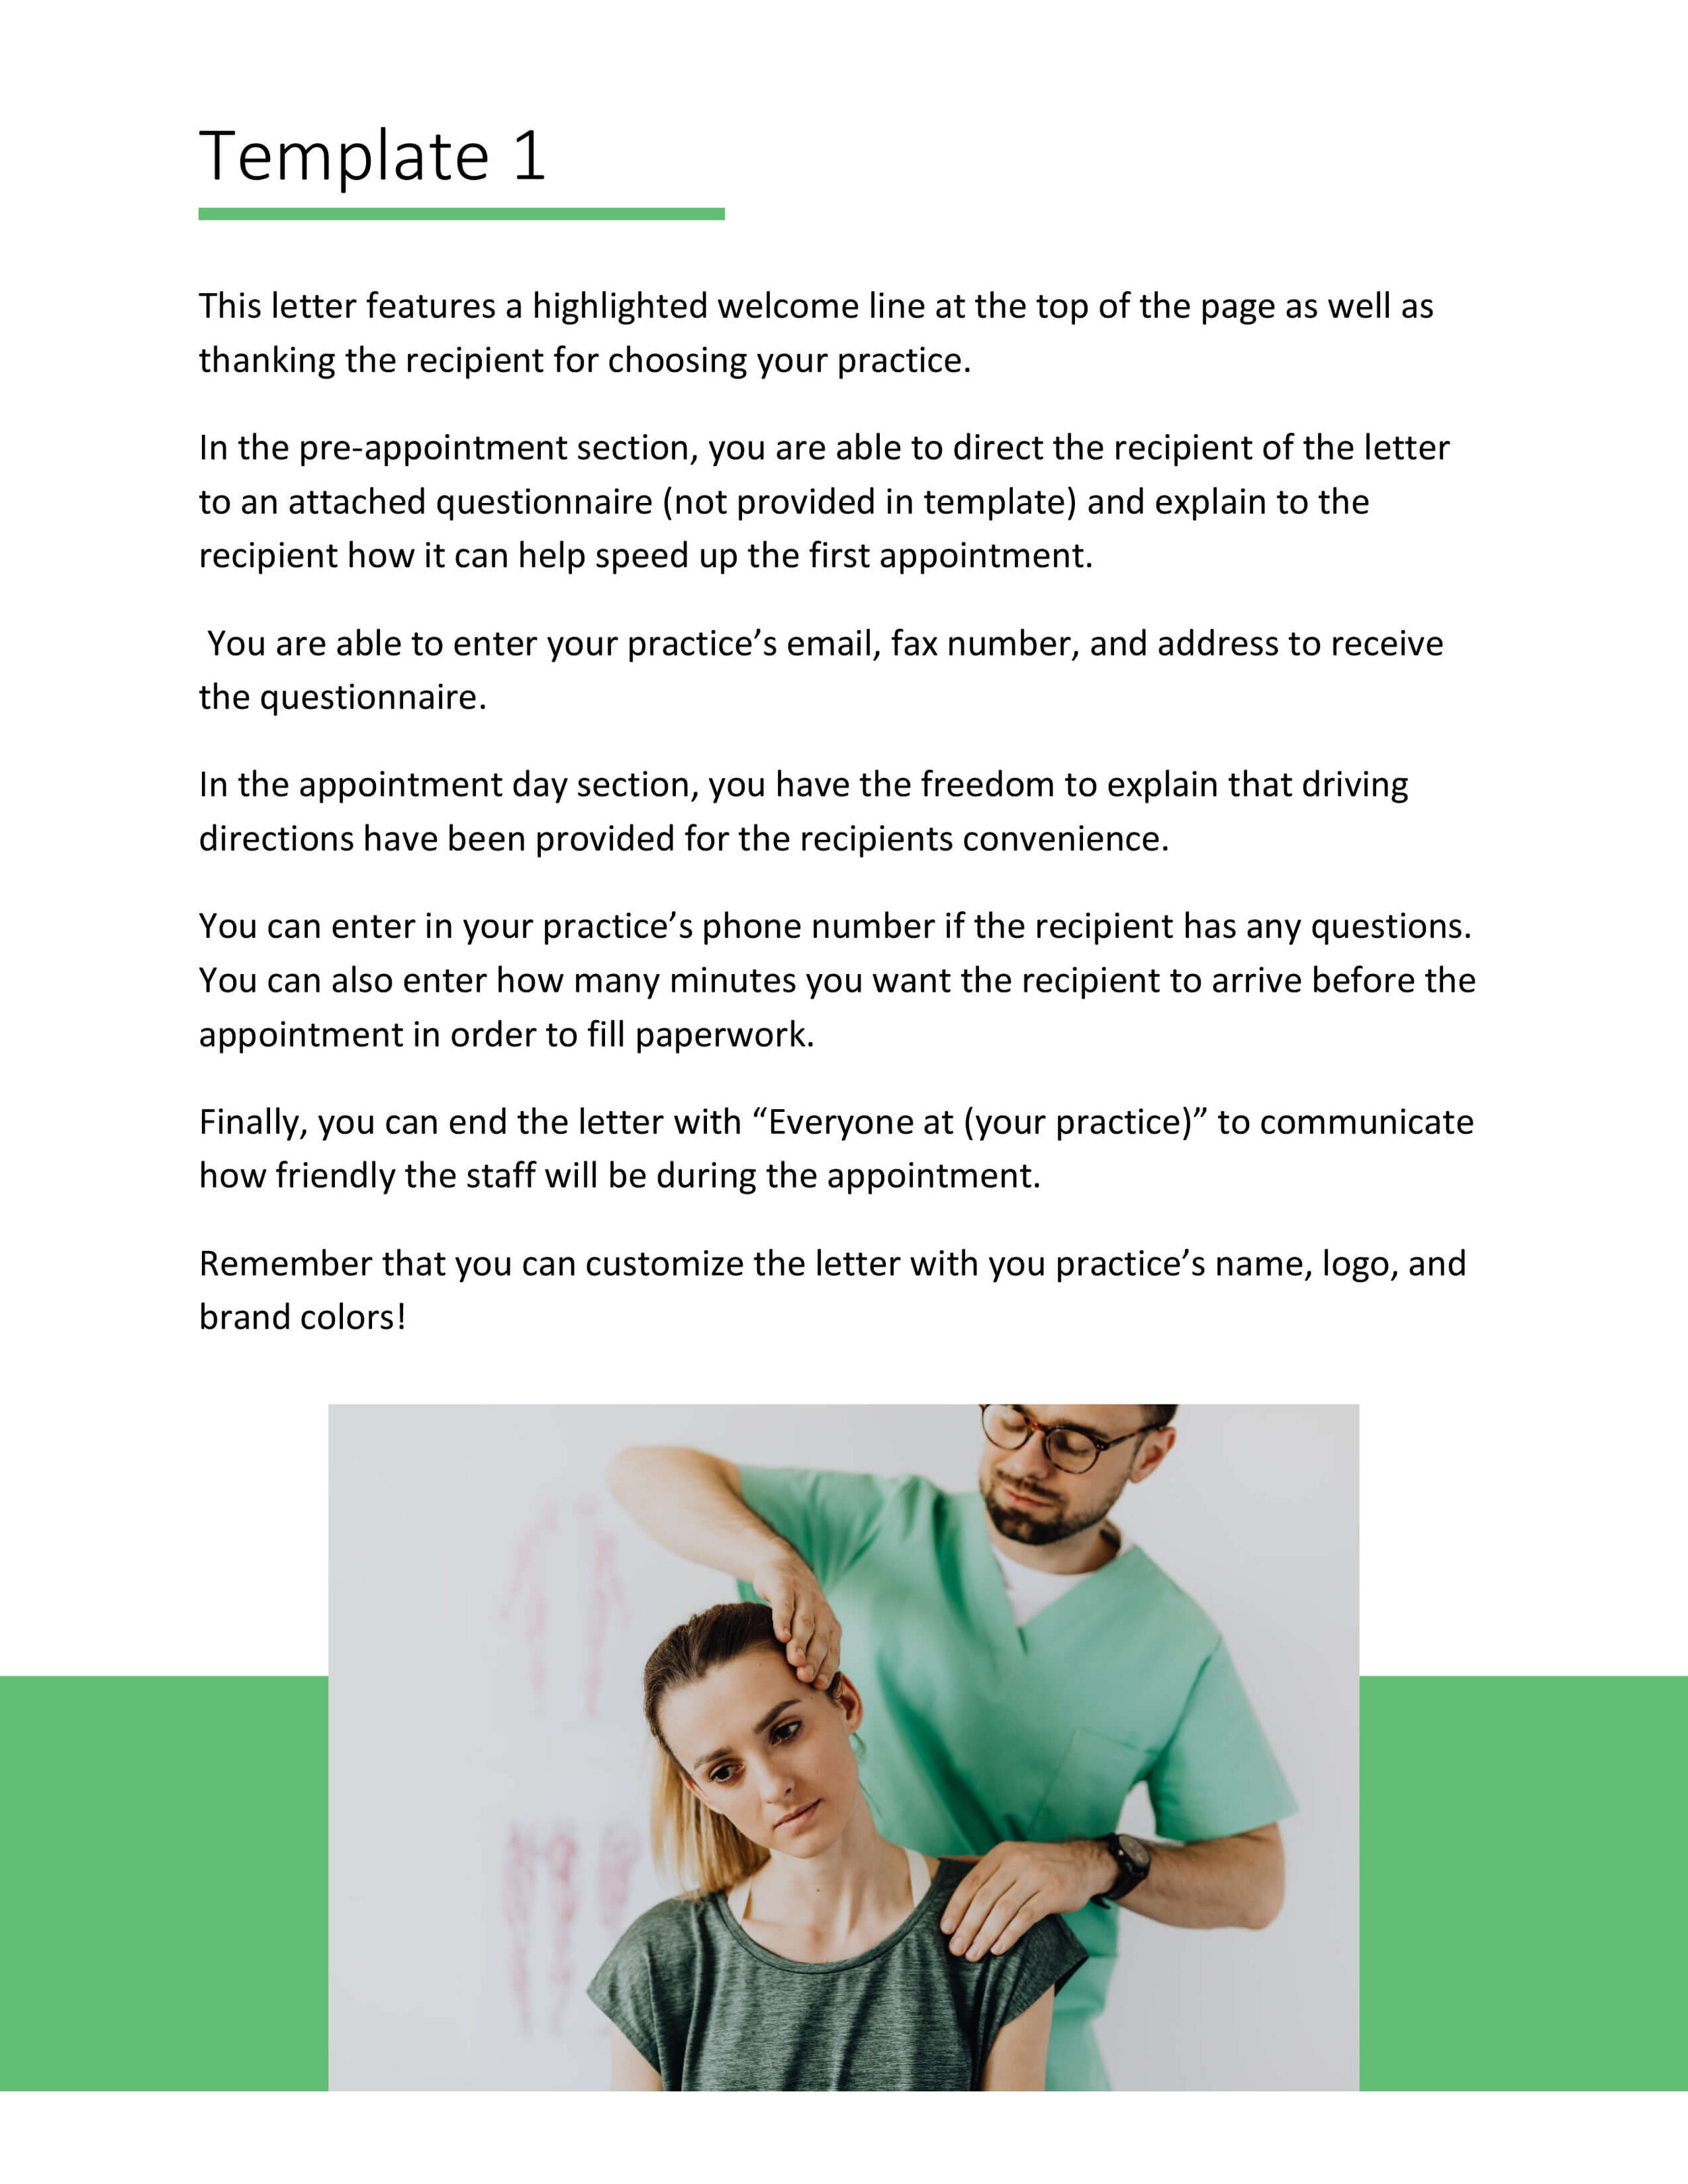 5 New Patient Welcome Letter Templates for Chiropractors-3.jpg